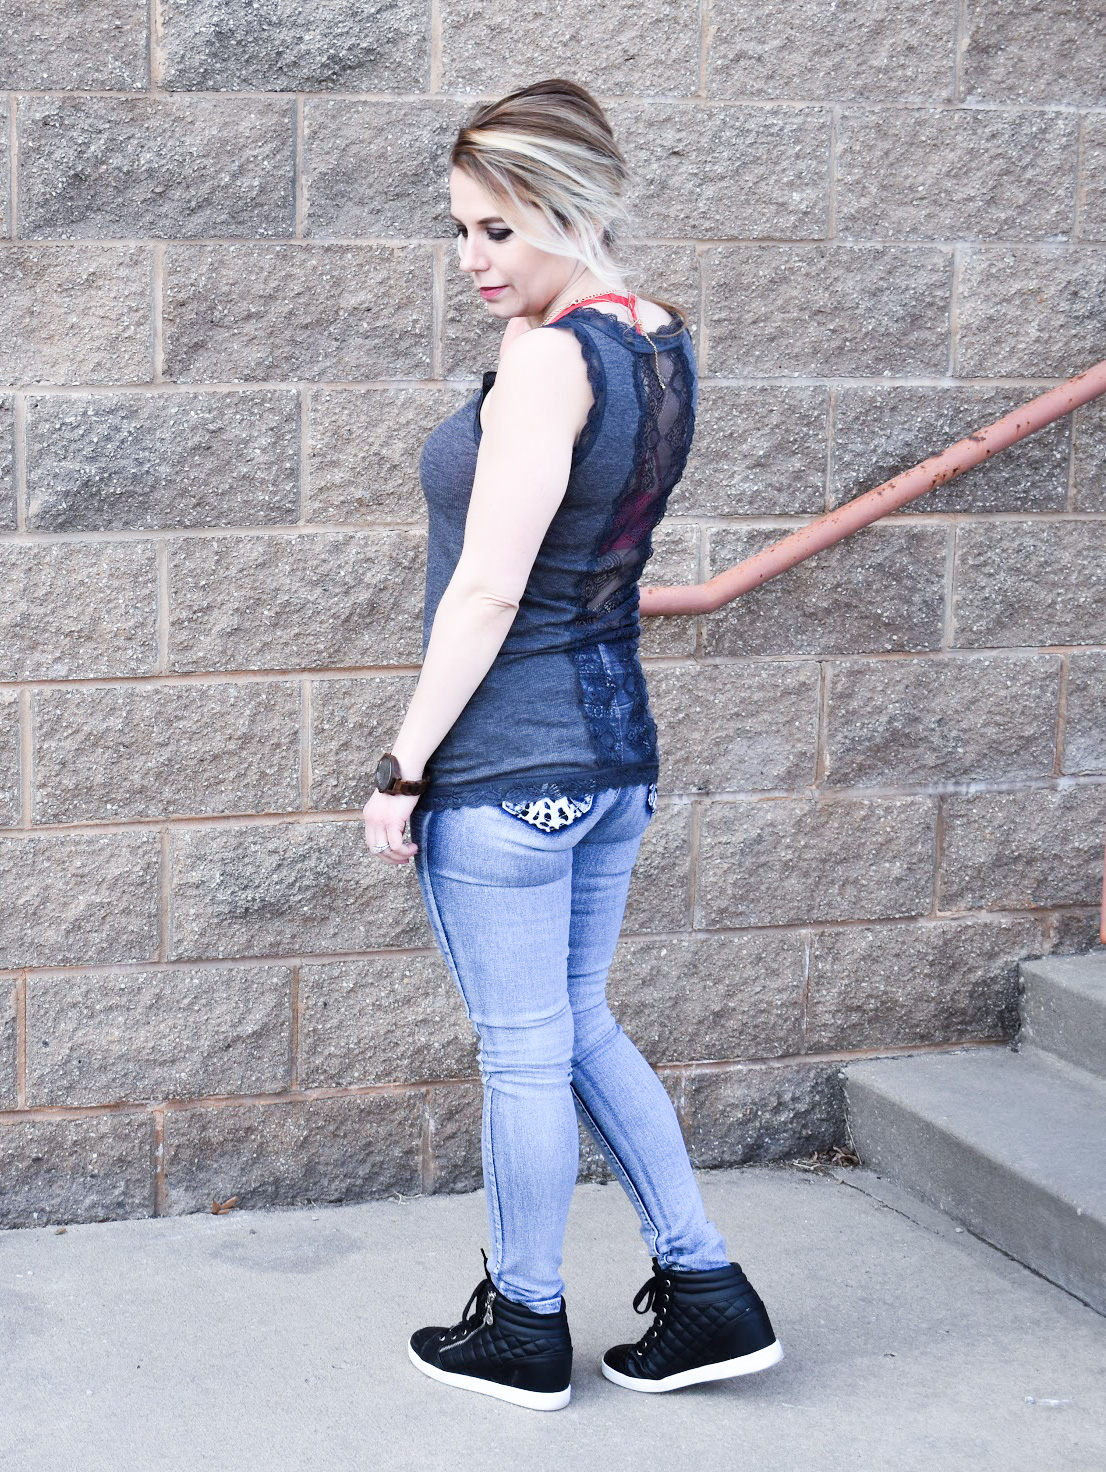 What to Wear Under a Lace Back Top: Lace back tops, open back tops, and sheer blouses present unique wardrobe challenges. Here's how fashion blogger COVET by tricia styled a lace back tank top with skinny jeans and wedge sneakers for a fun warm weather look! Sometimes, the best way to work the lace back is to simply embrace the exposed bra look with a fun bra or bralette!